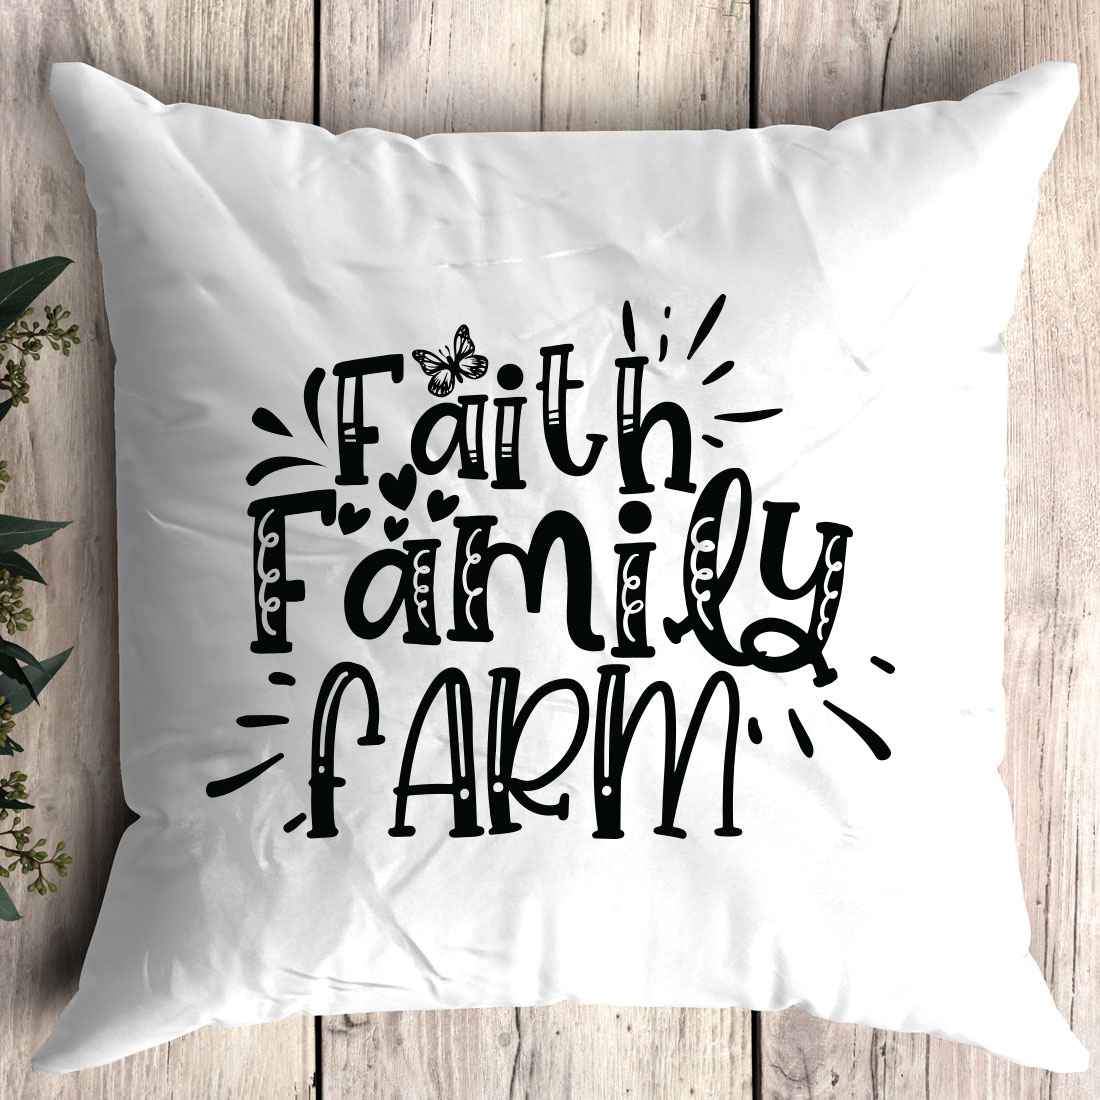 White pillow with the words faith.